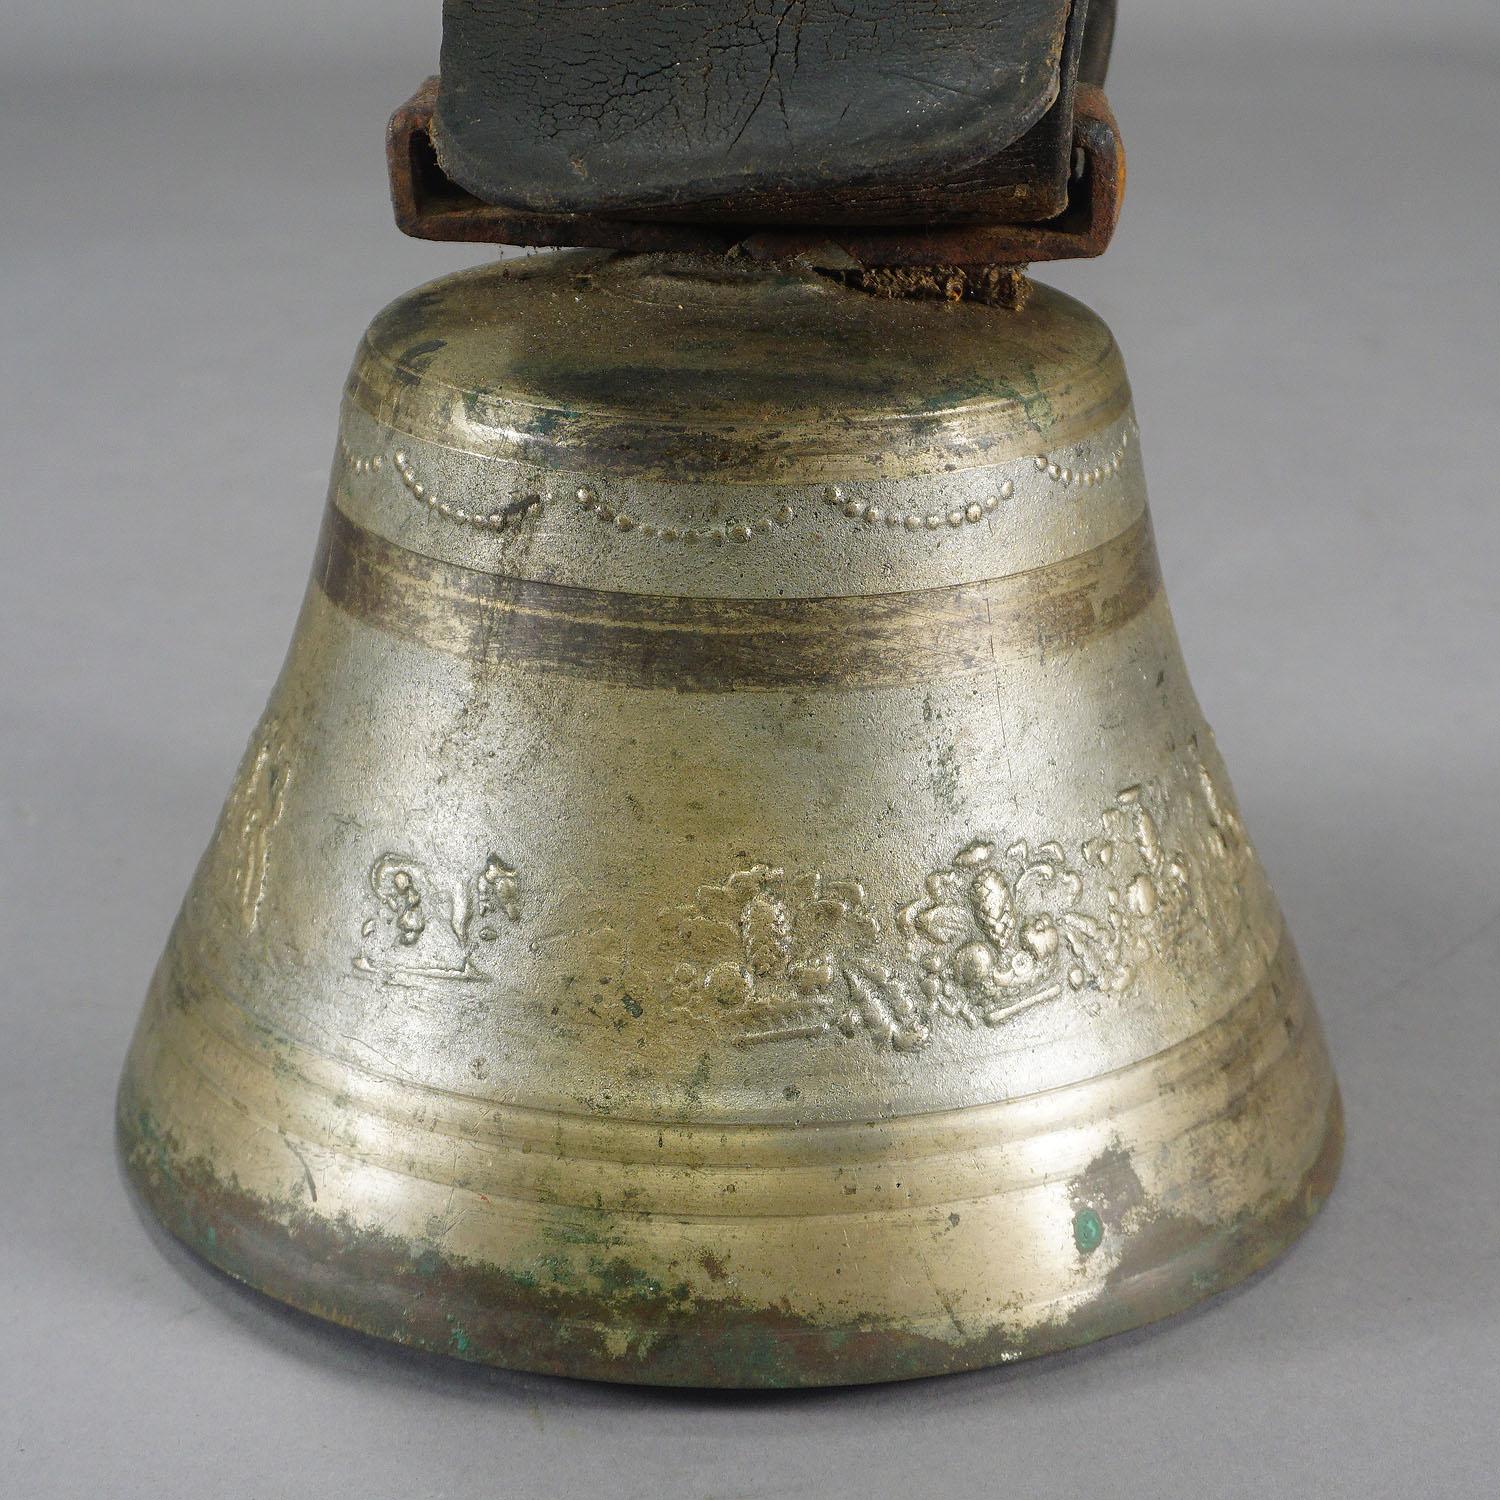 A large casted bronze cow bell manufactured in Switzerland, around 1900. The antique bell features high relief motifs of fruits and foliages. The bell comes with its original brown leather strap with buckle. Bells like this one are still used